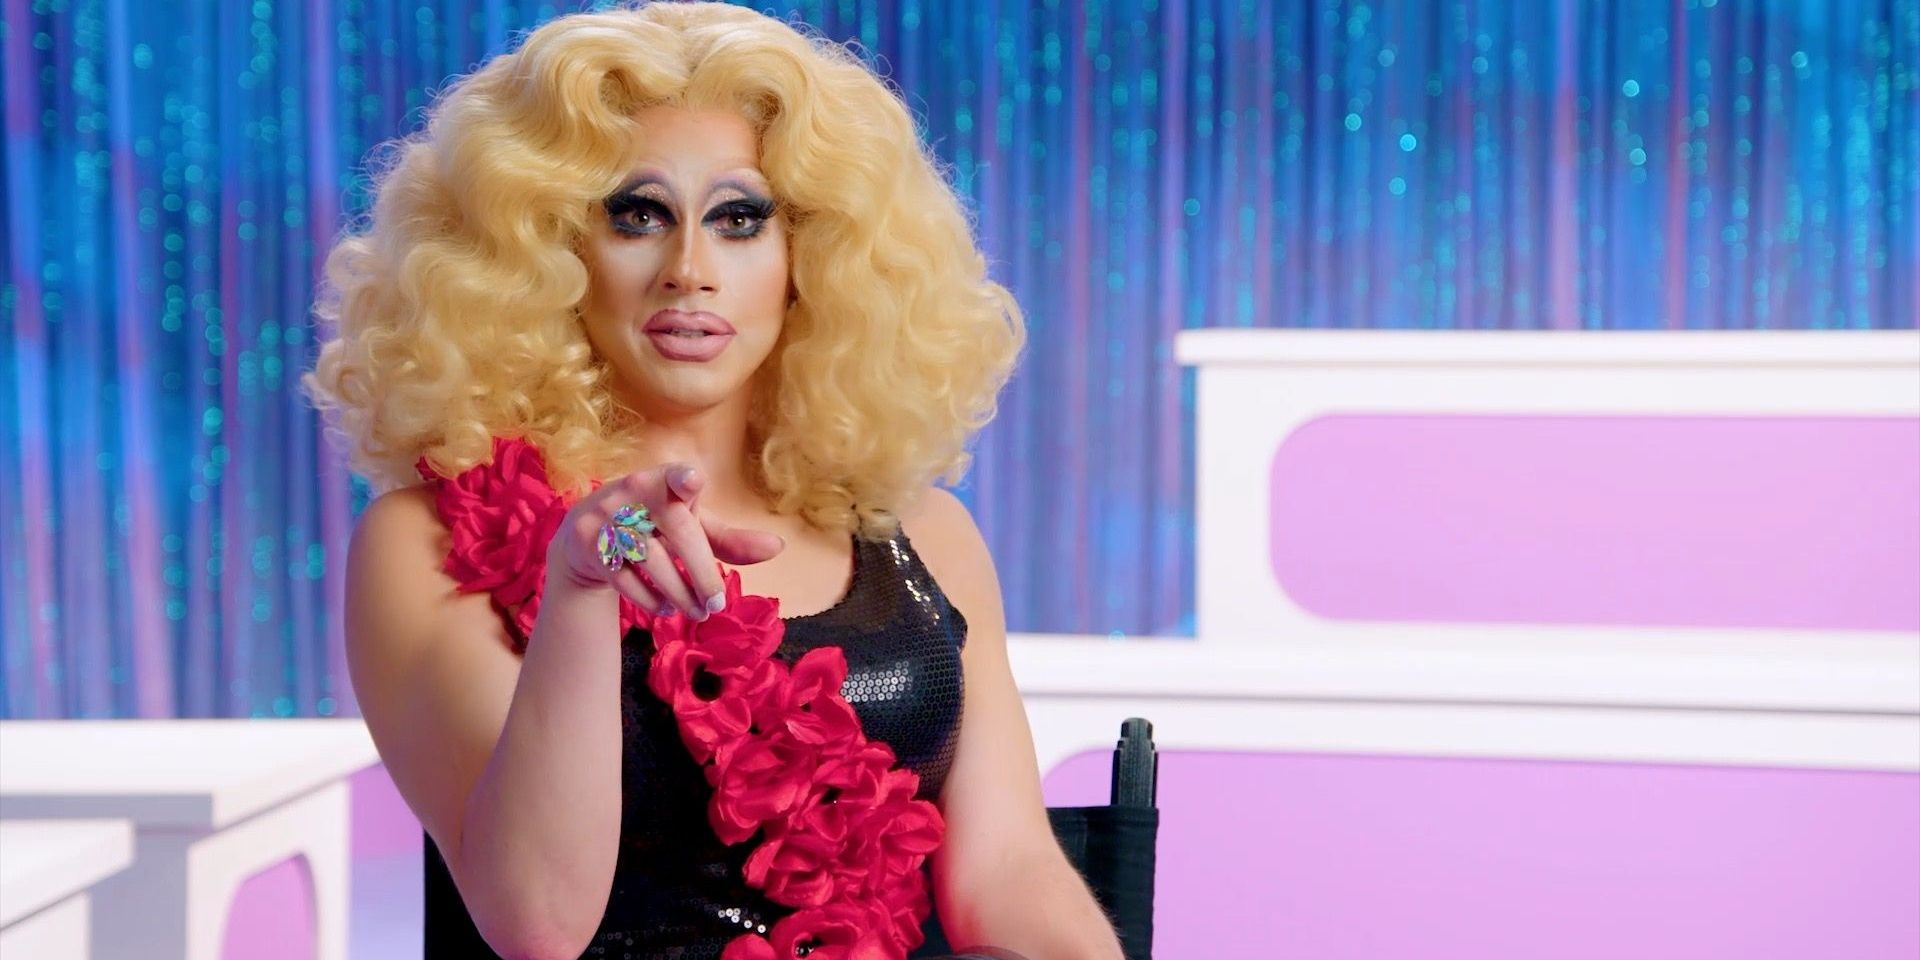 Trixie Mattel as RuPaul for the Snatch Game on RuPauls Drag Race All Stars 3